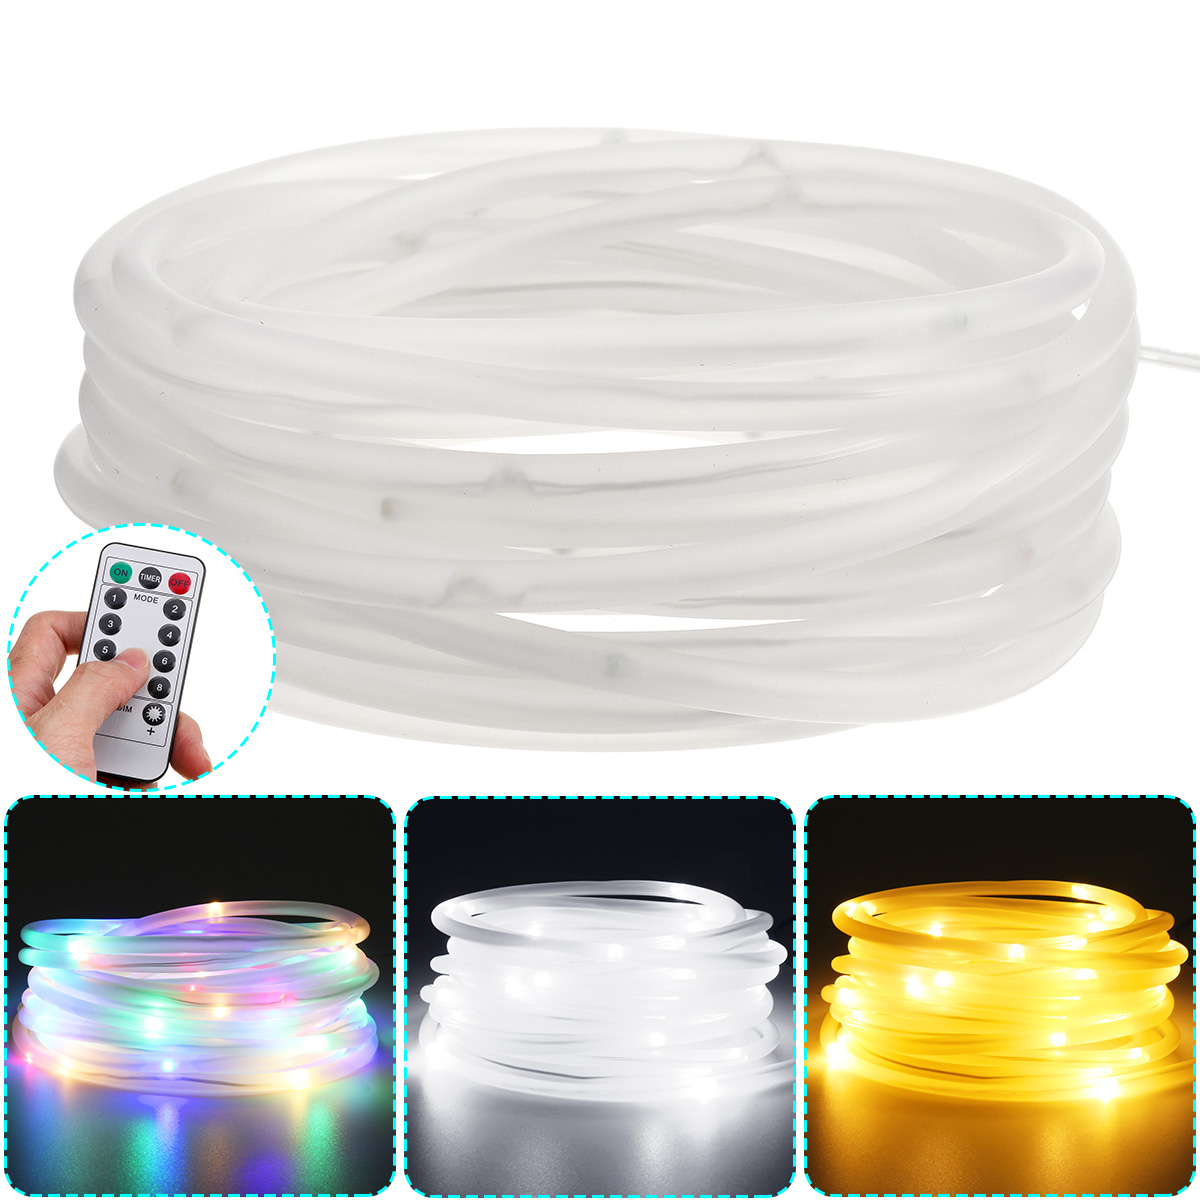 Find 5M 50LED Outdoor Tube Rope Strip String Light RGB Lamp Xmas Home Decor Lights for Sale on Gipsybee.com with cryptocurrencies